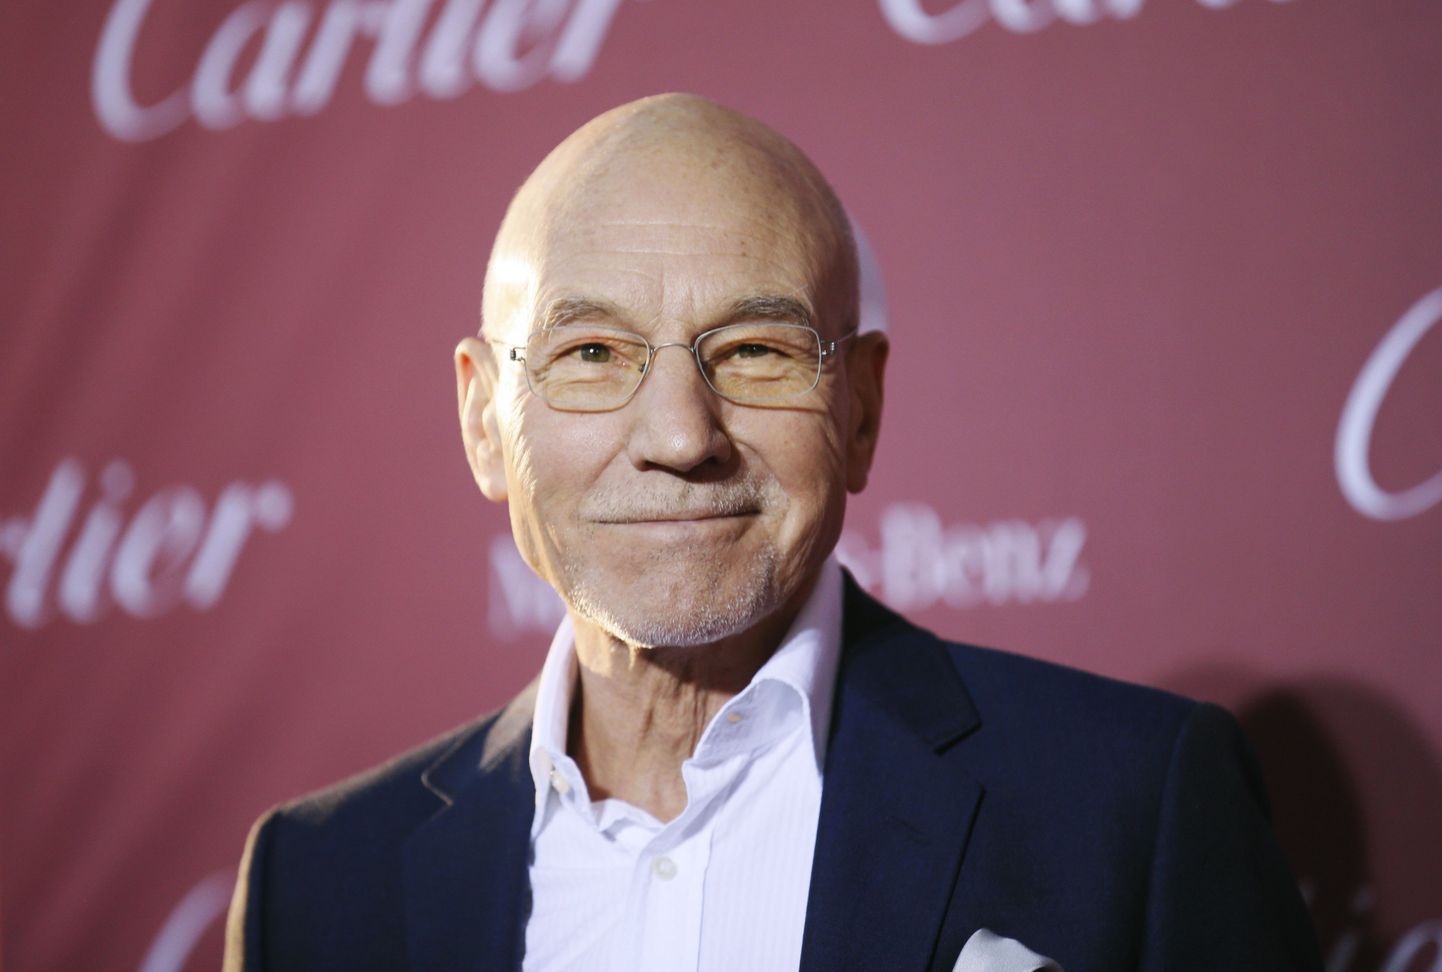 Actor Patrick Stewart poses at the 26th Annual Palm Springs International Film Festival Awards Gala in Palm Springs, California January 3, 2015. REUTERS/Danny Moloshok (UNITED STATES - Tags: ENTERTAINMENT)